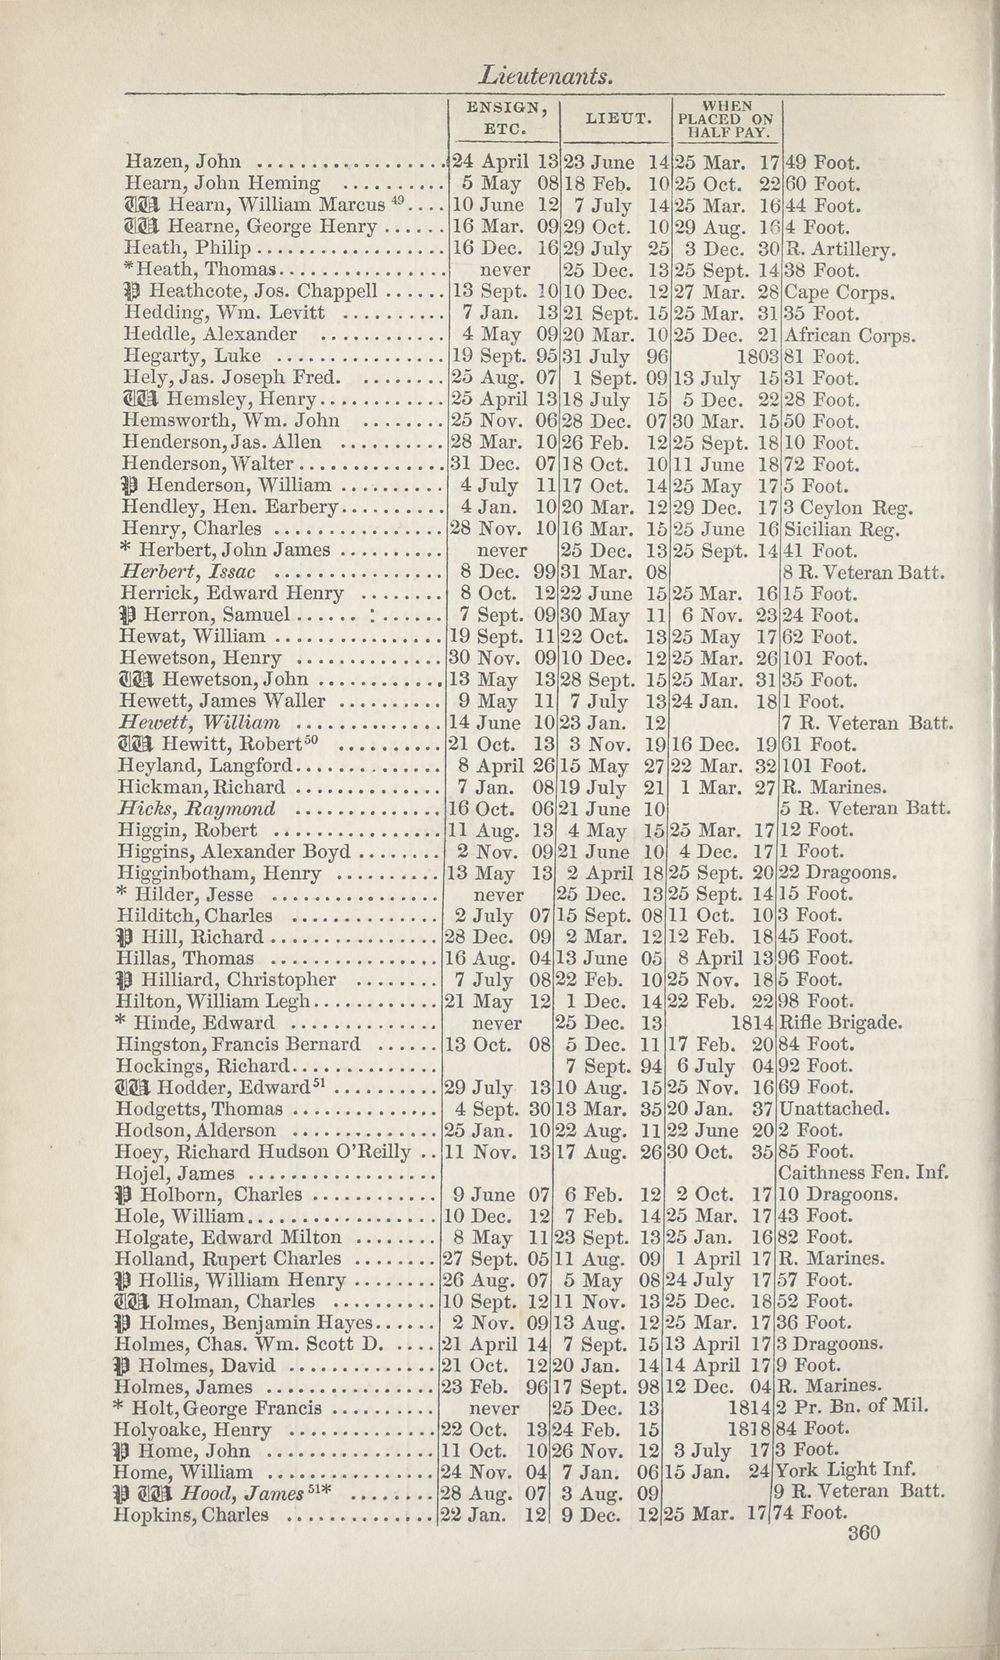 (368) - Army lists > Hart's Army Lists > New annual army list > 1840 ...